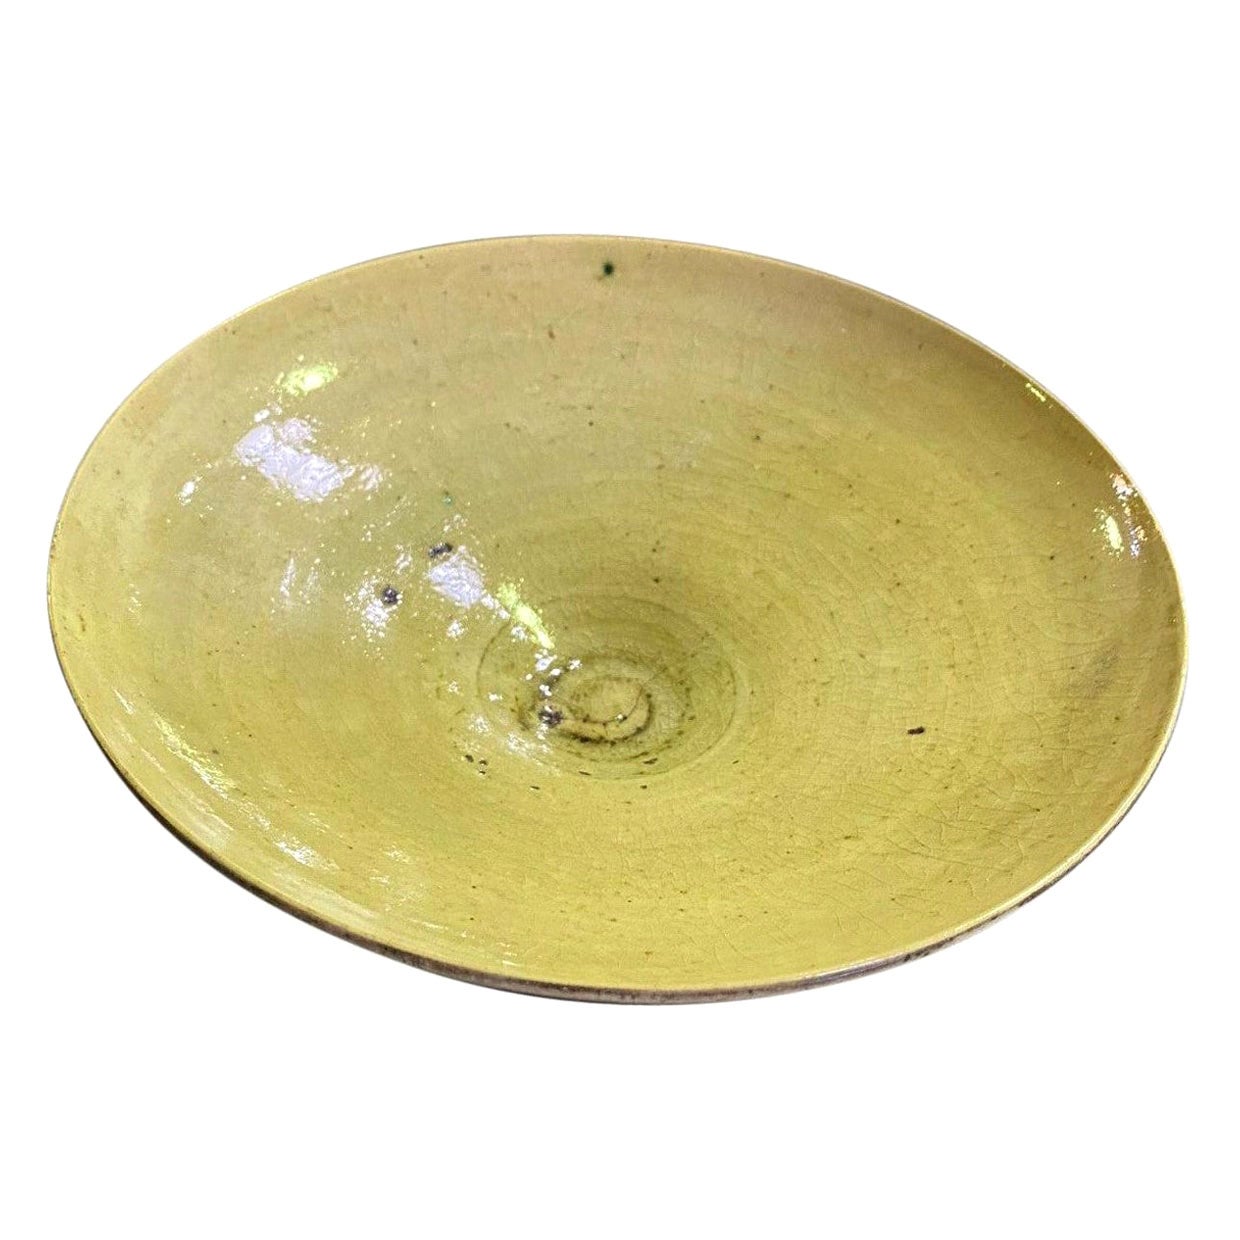 Lucie Rie Signed Stamped Yellow Speckle Glazed British Pottery Bowl, circa 1950s For Sale